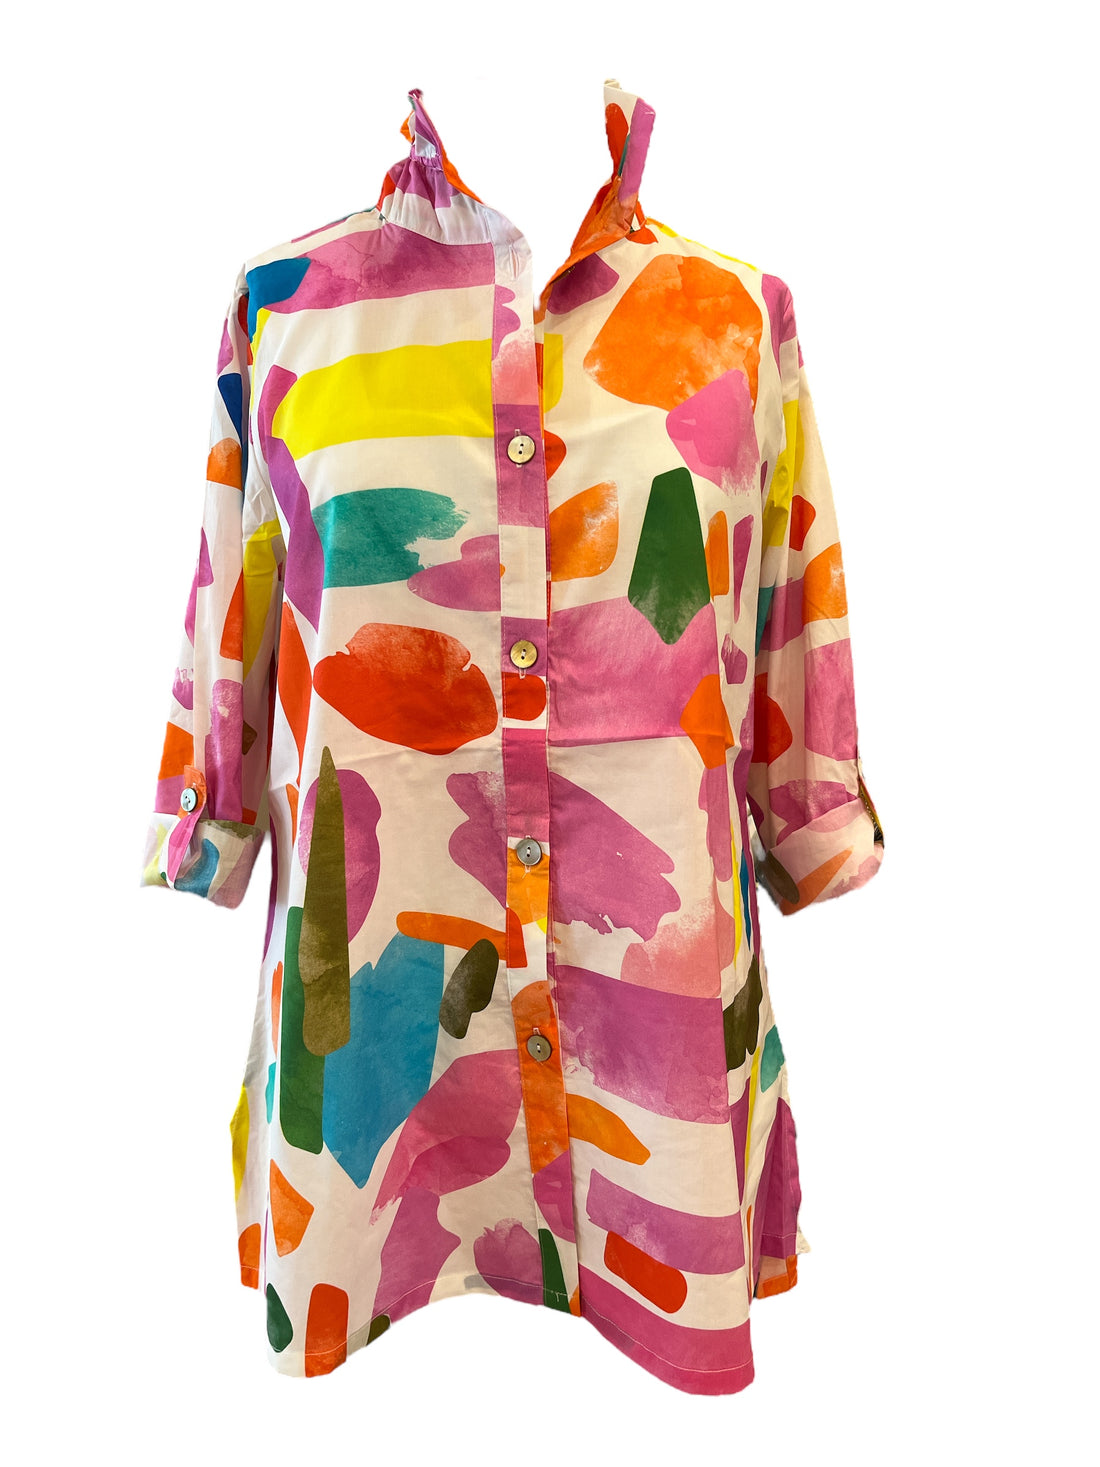 Too Fan | Vibrant Abstract Top